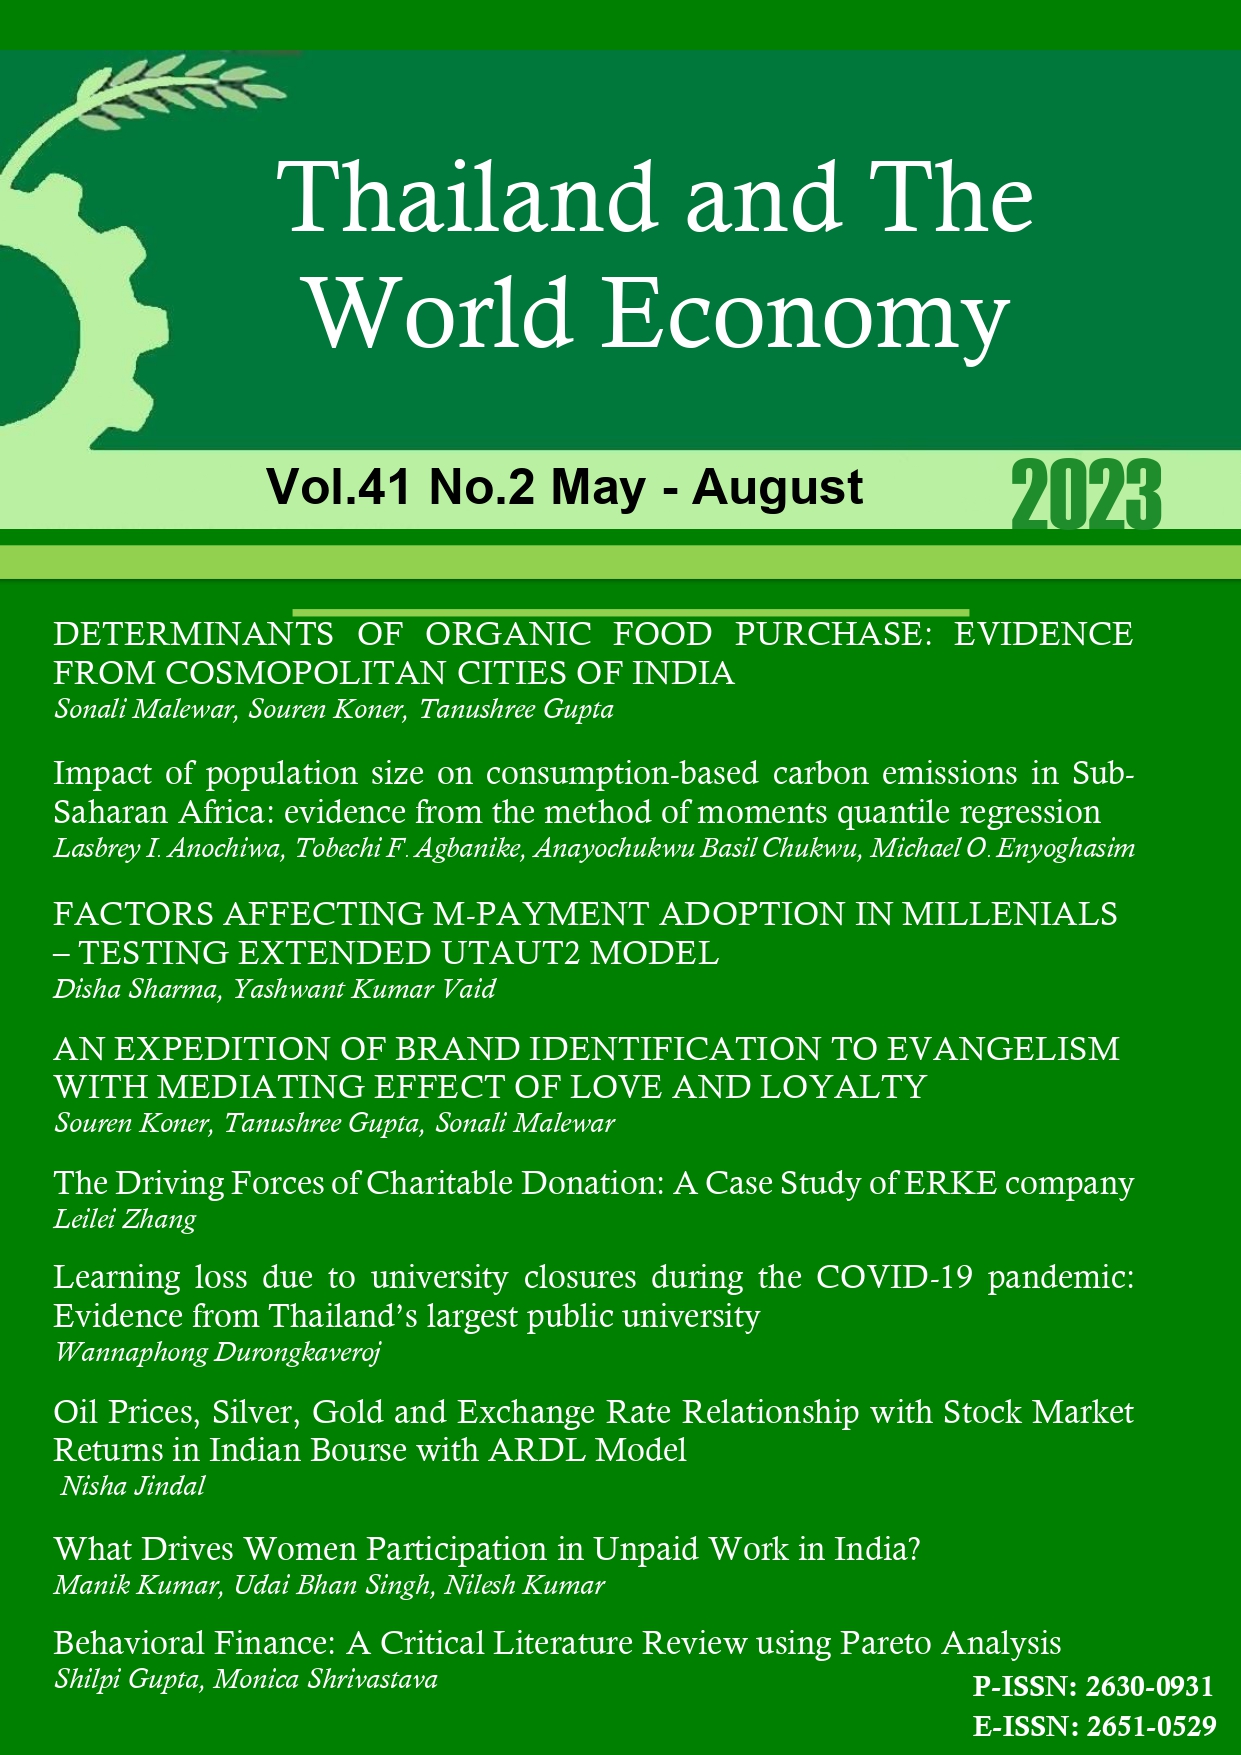 					View Vol. 41 No. 2 (2023): Thailand and The World Economy
				